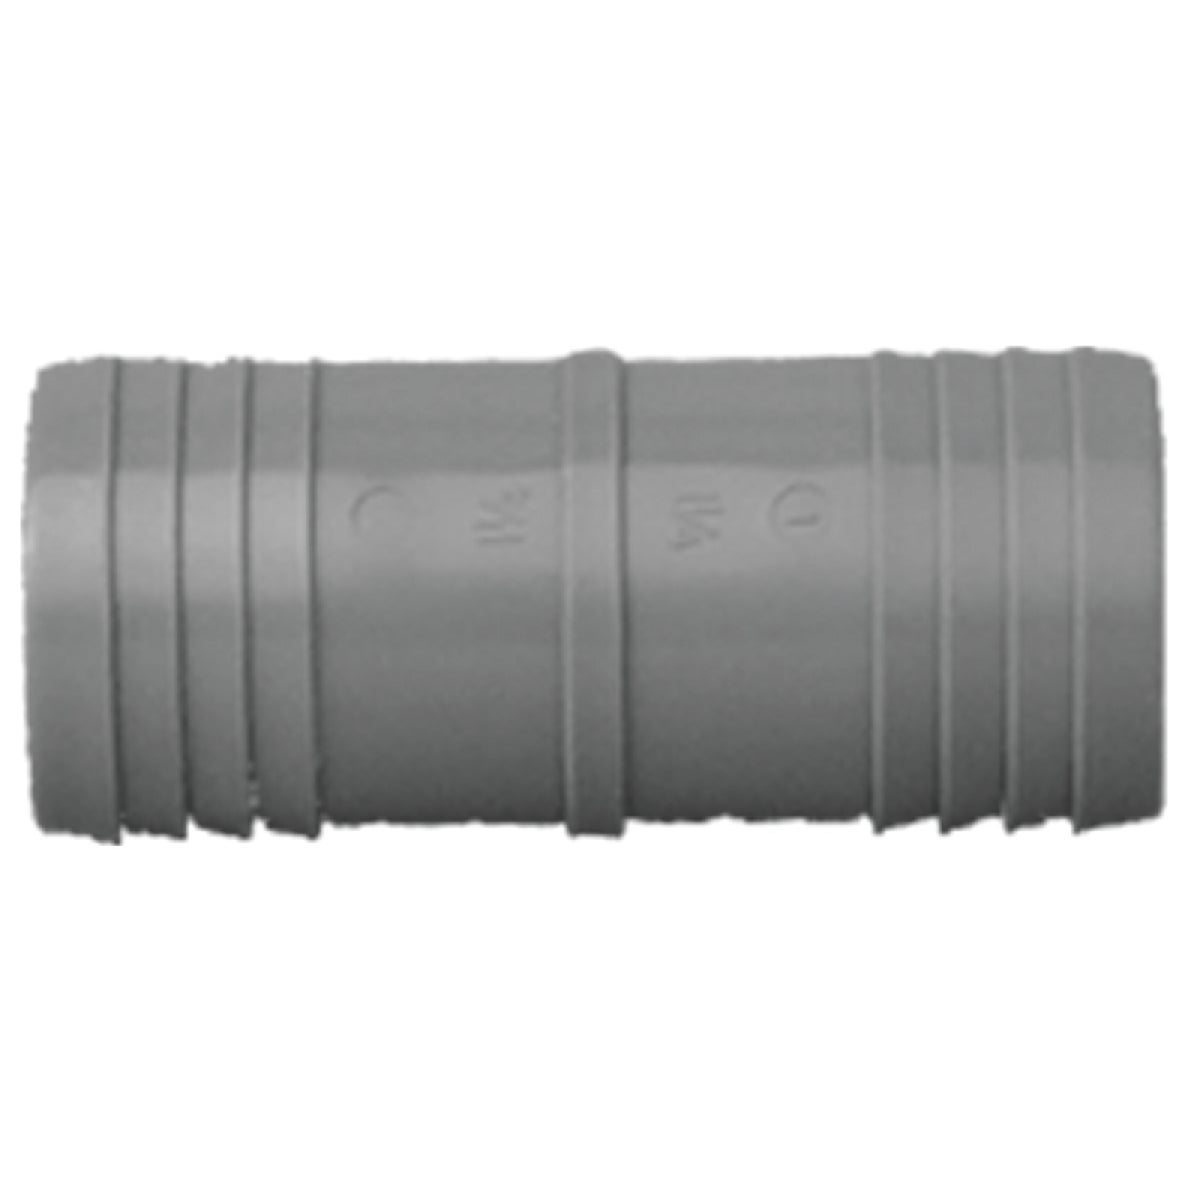 Item 424632, Polypropylene fitting for polyethylene pipe in buried cold water 